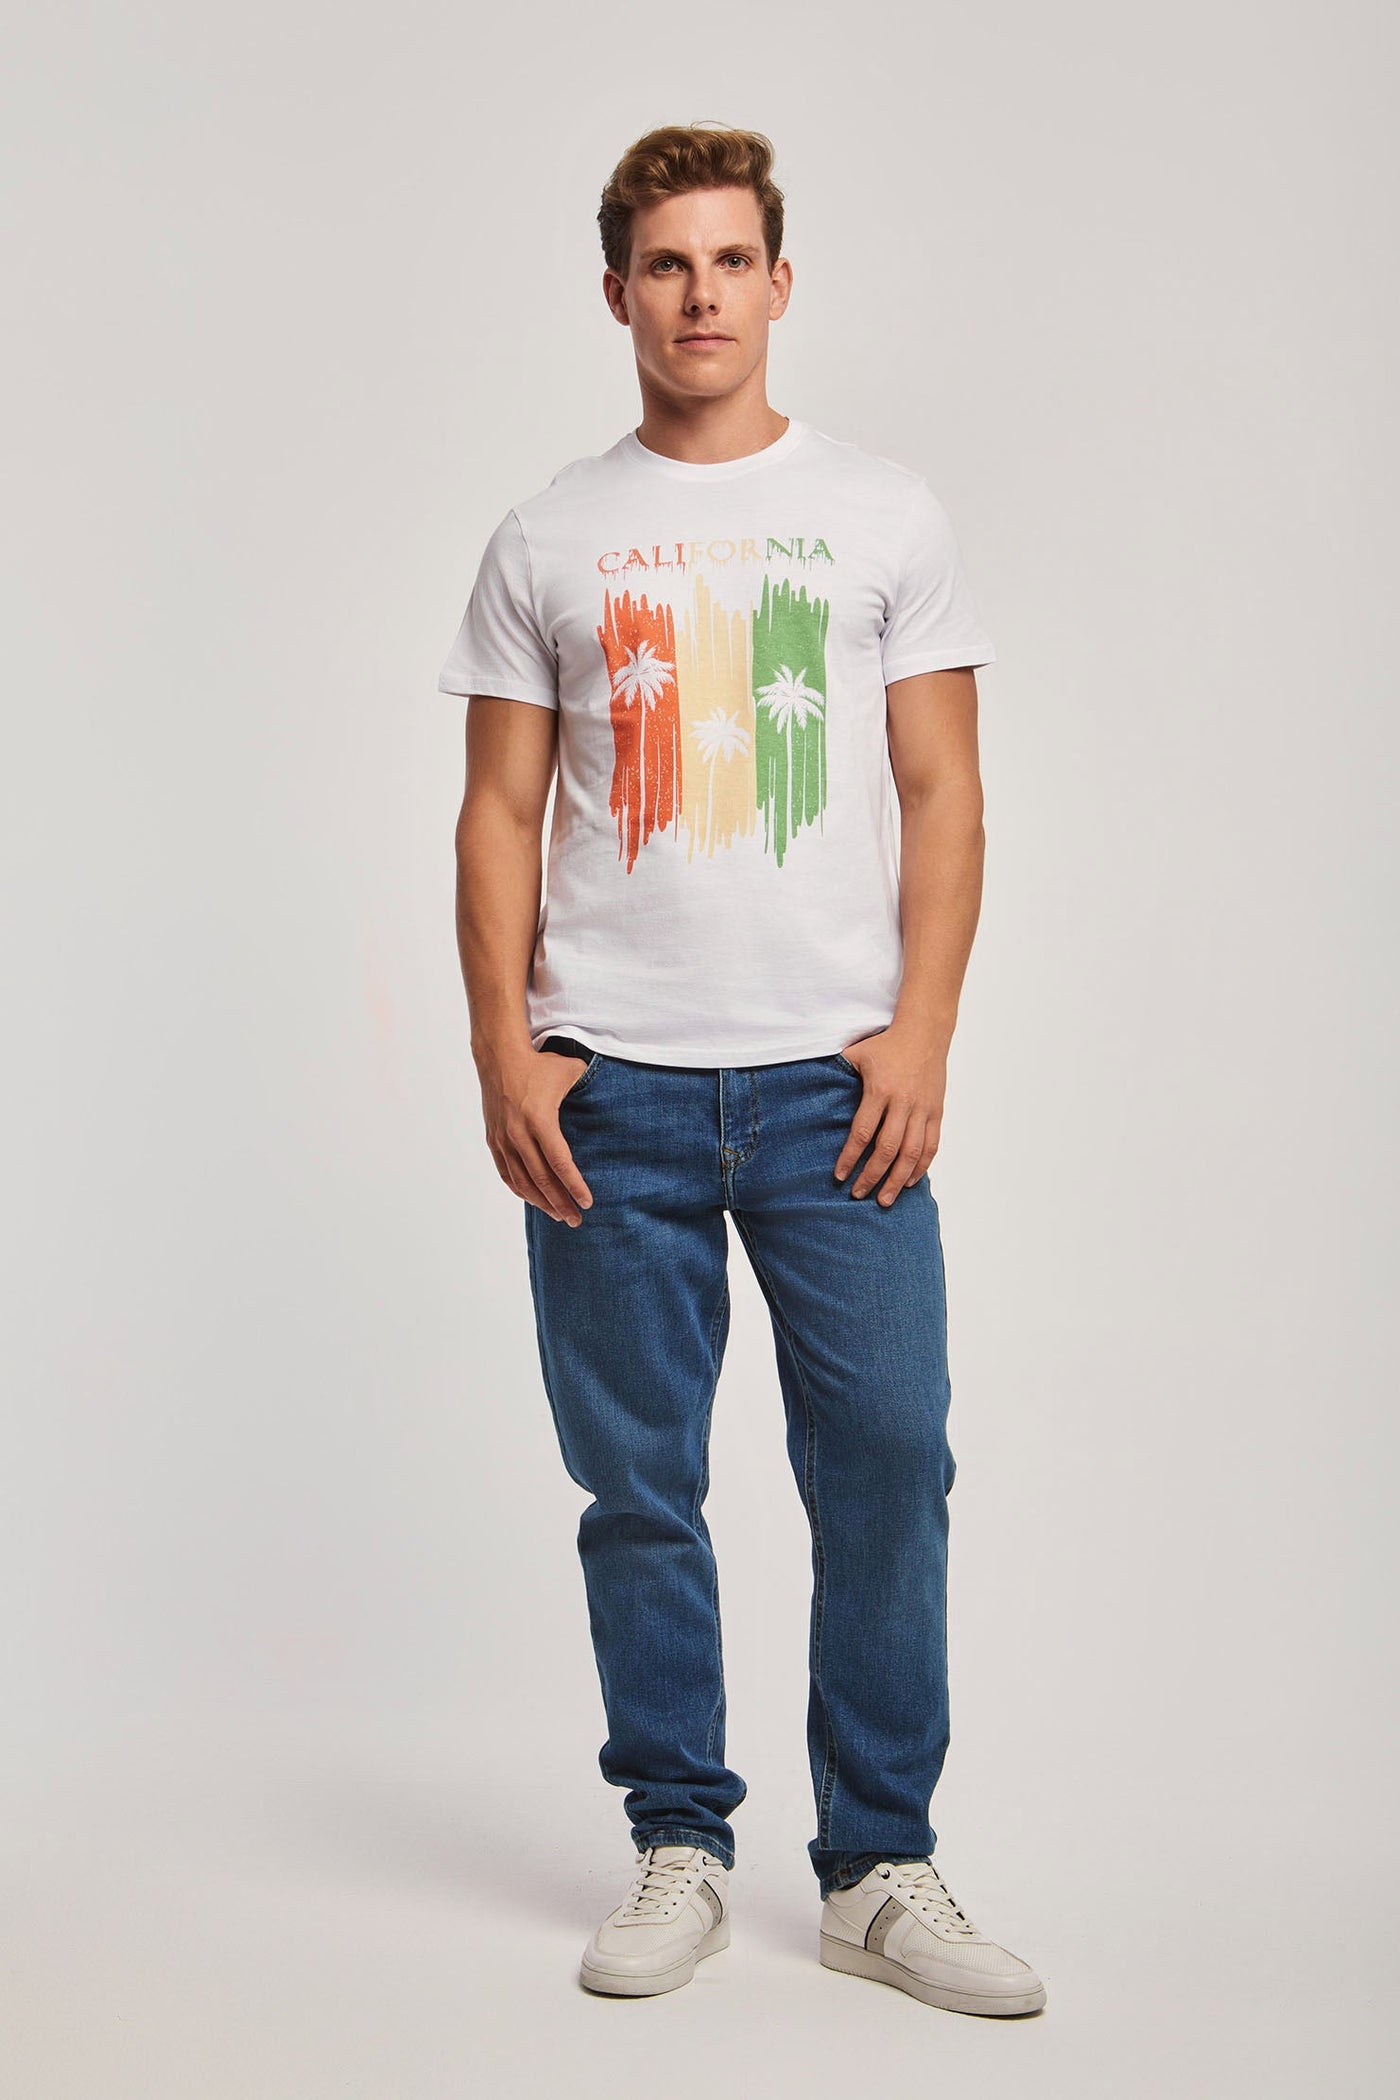 T-Shirt - Colorful Patterned - Crew Neck